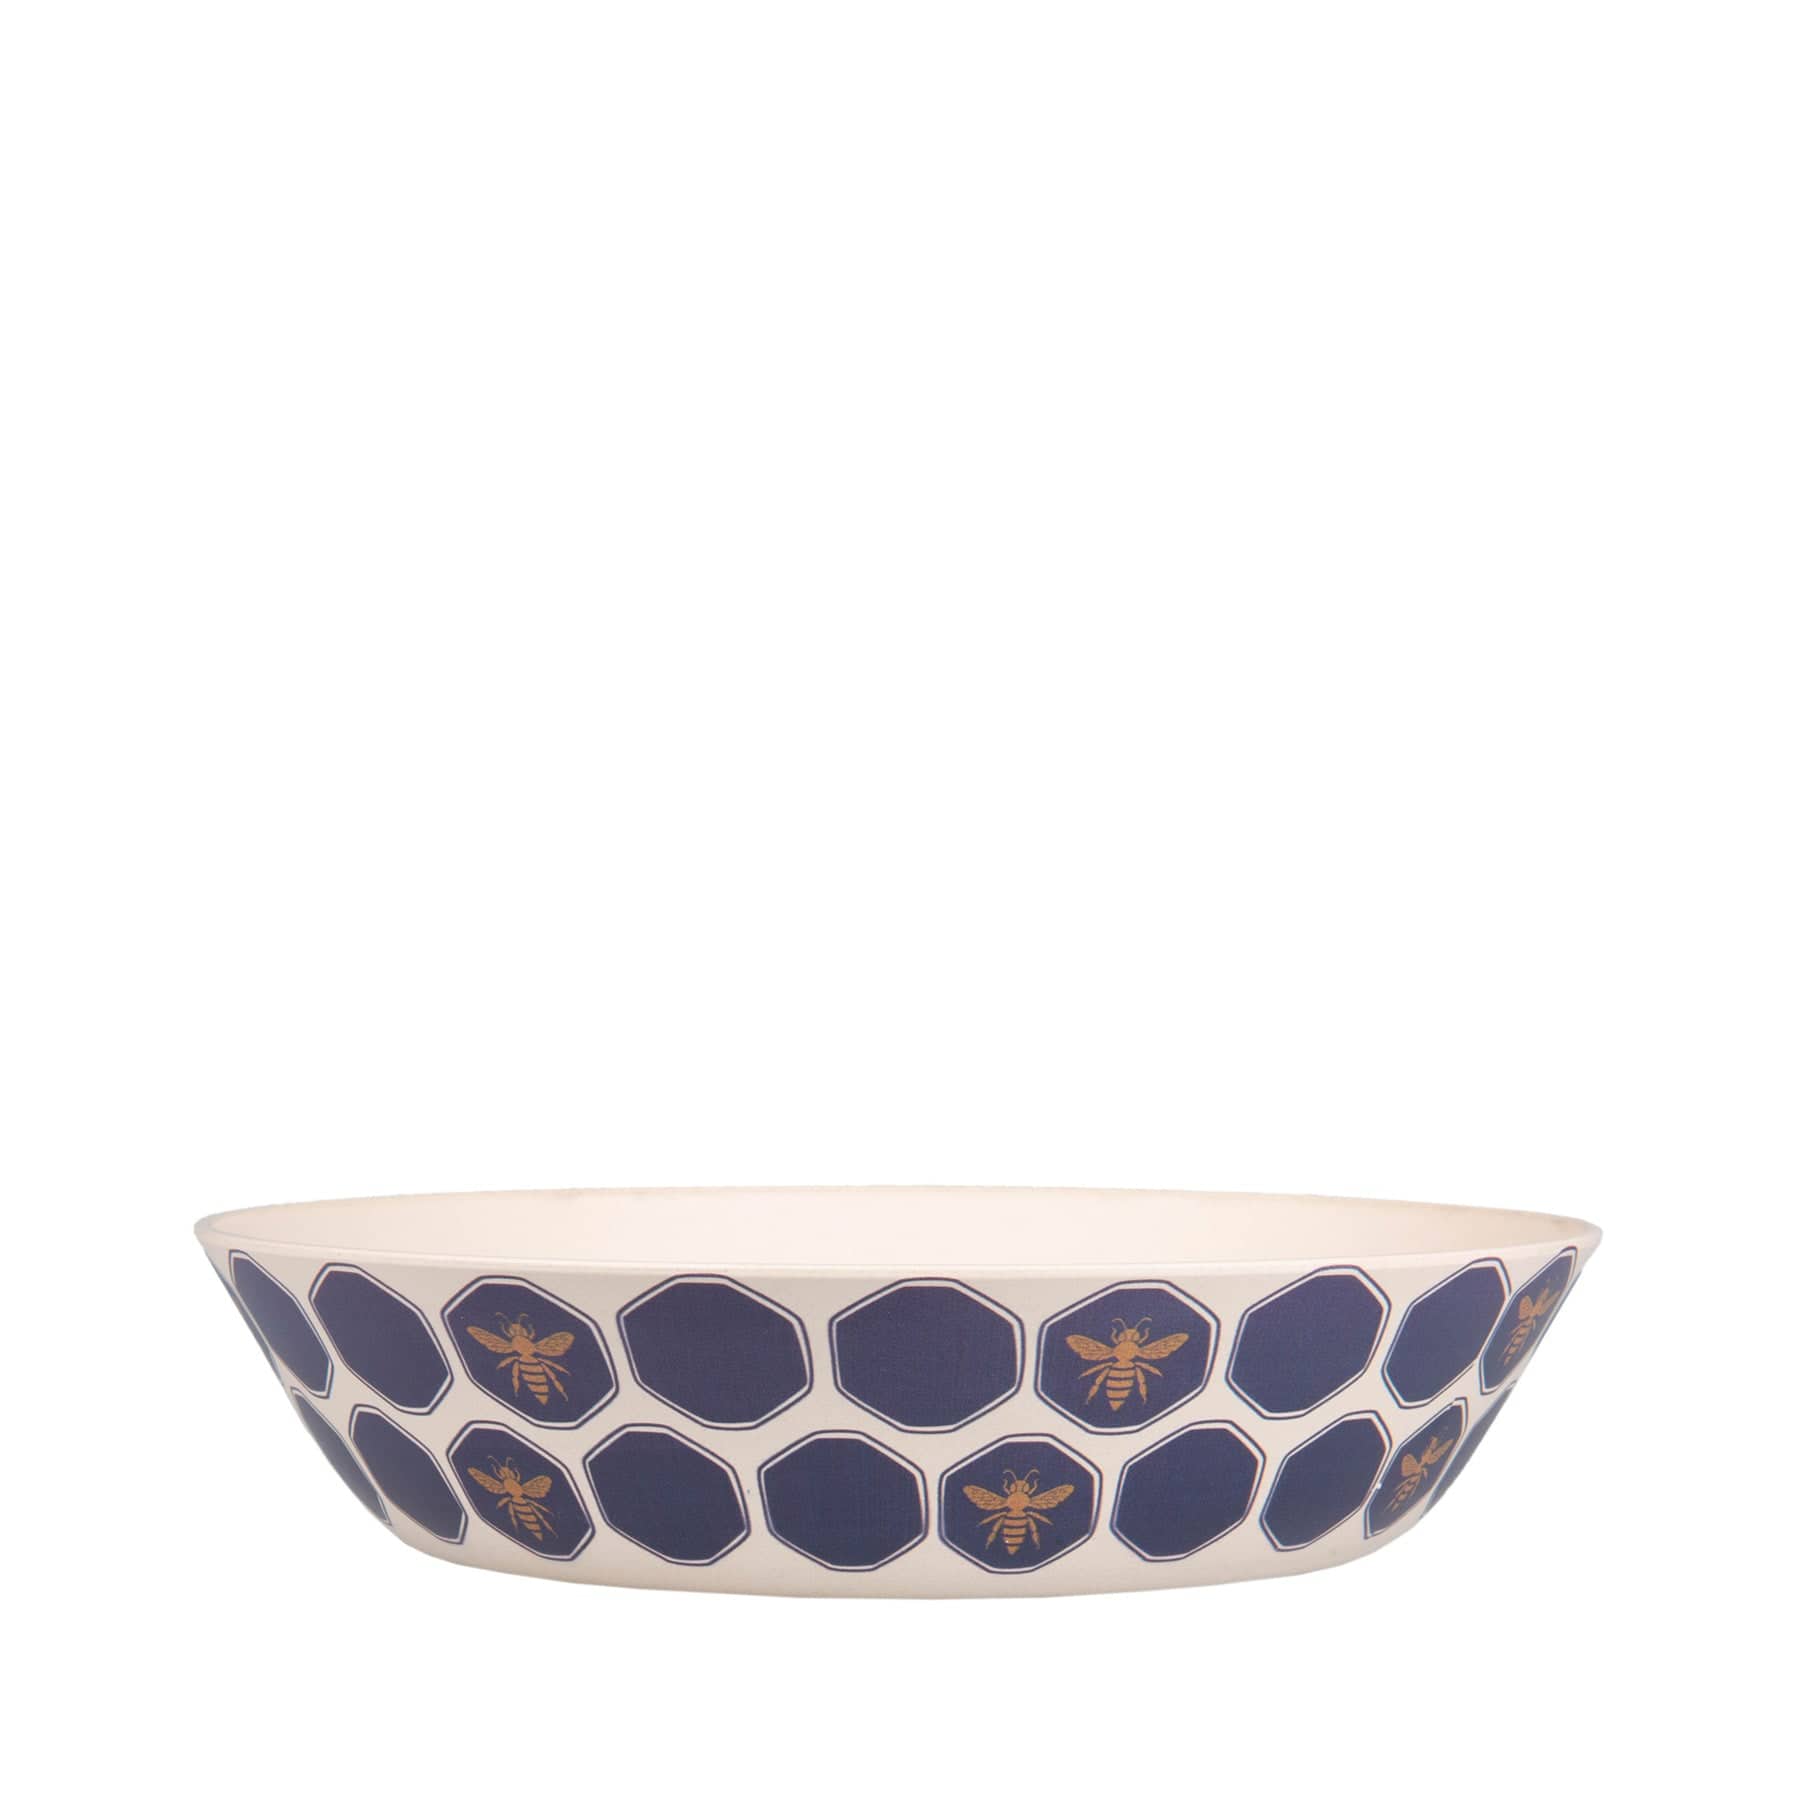 Elegant white ceramic bowl with blue geometric honeycomb pattern and gold bee motifs on a white background